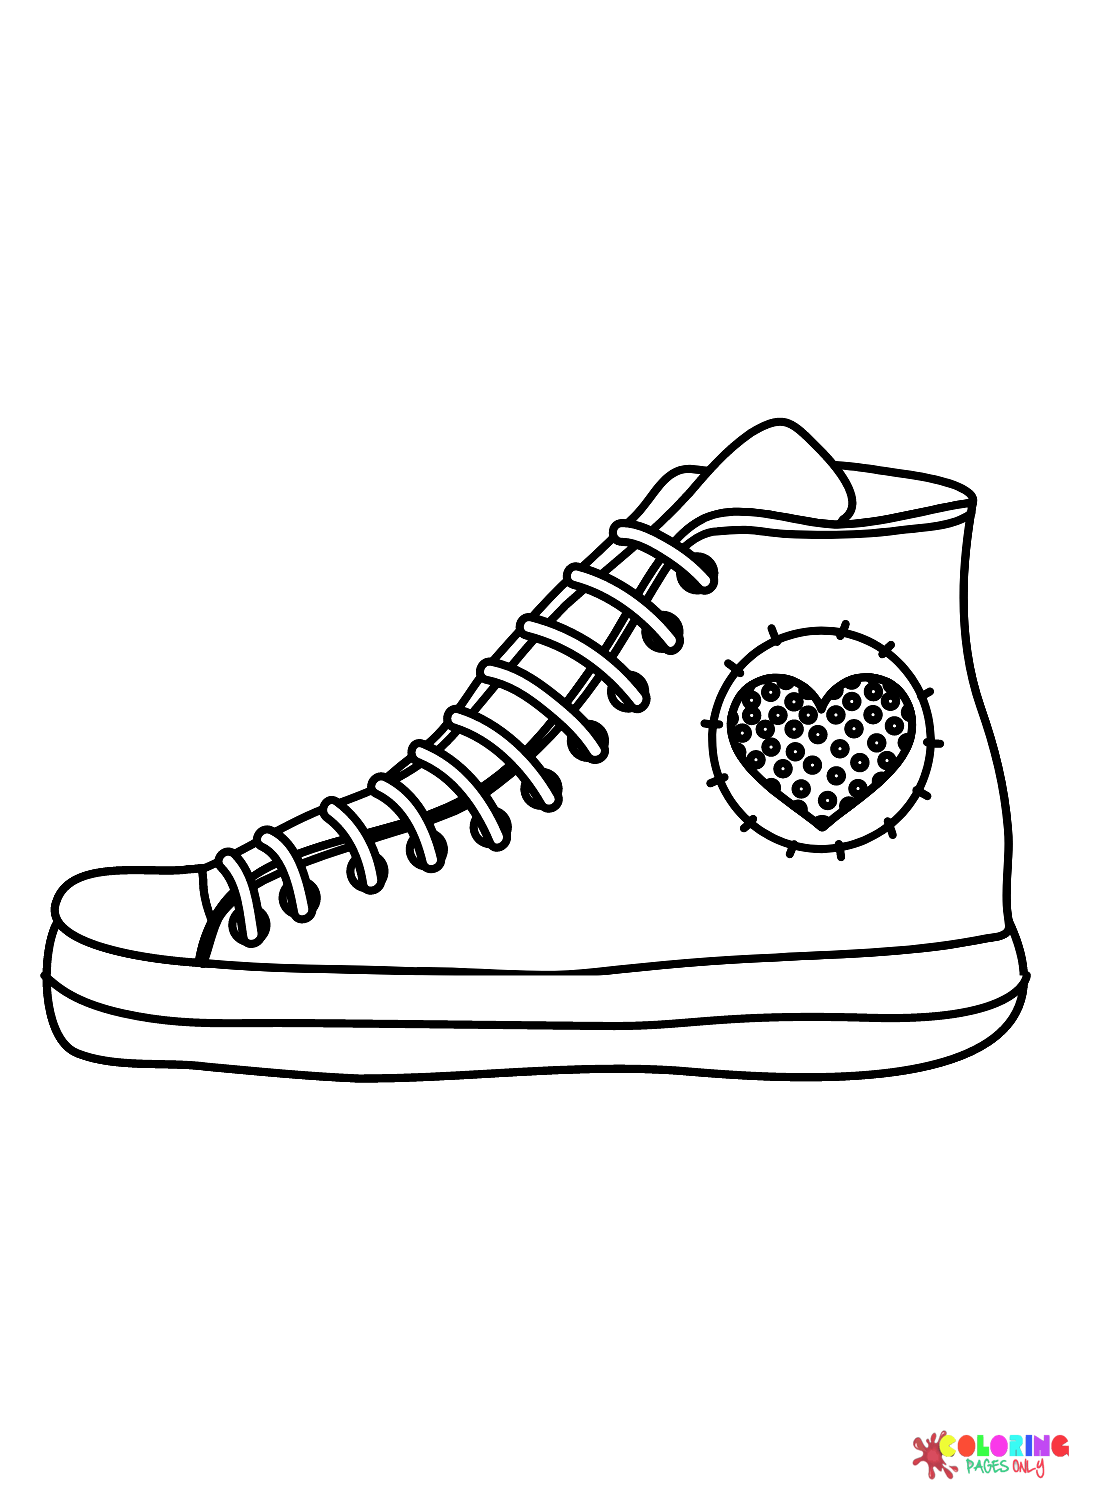 Sneaker color Sheets Coloring Pages Free Printable Coloring Pages